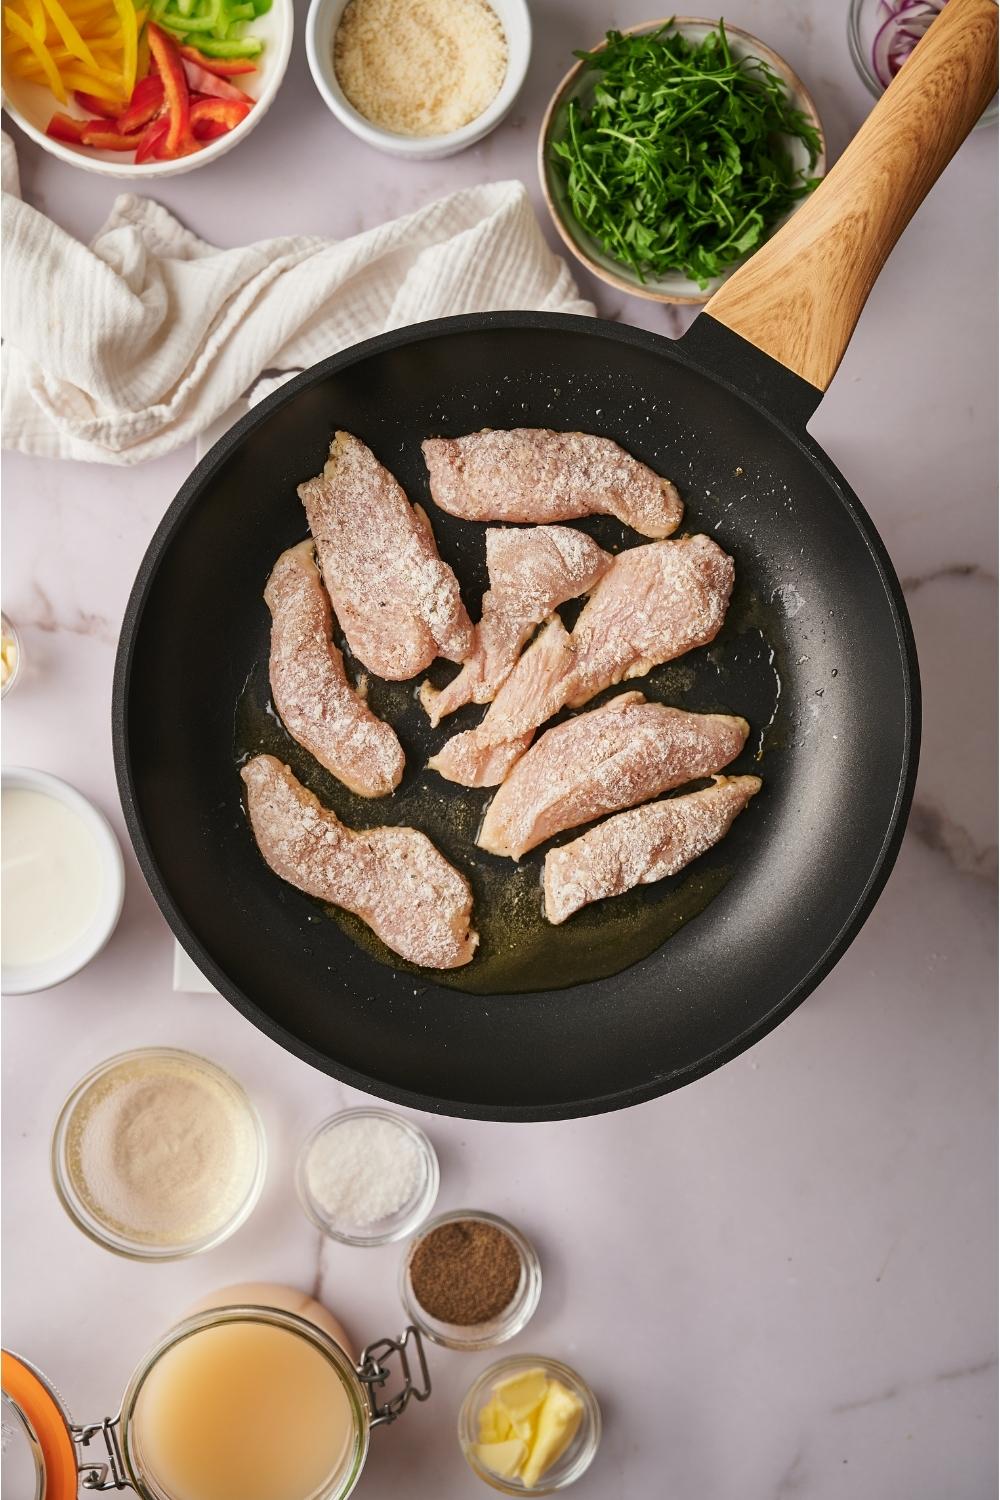 A skillet cooking raw chicken that has been tossed in a flour and seasoning mixture, with raw ingredients surrounding the skillet including bowls of sliced bell peppers, cheese, butter, oil, garlic, and parsley.